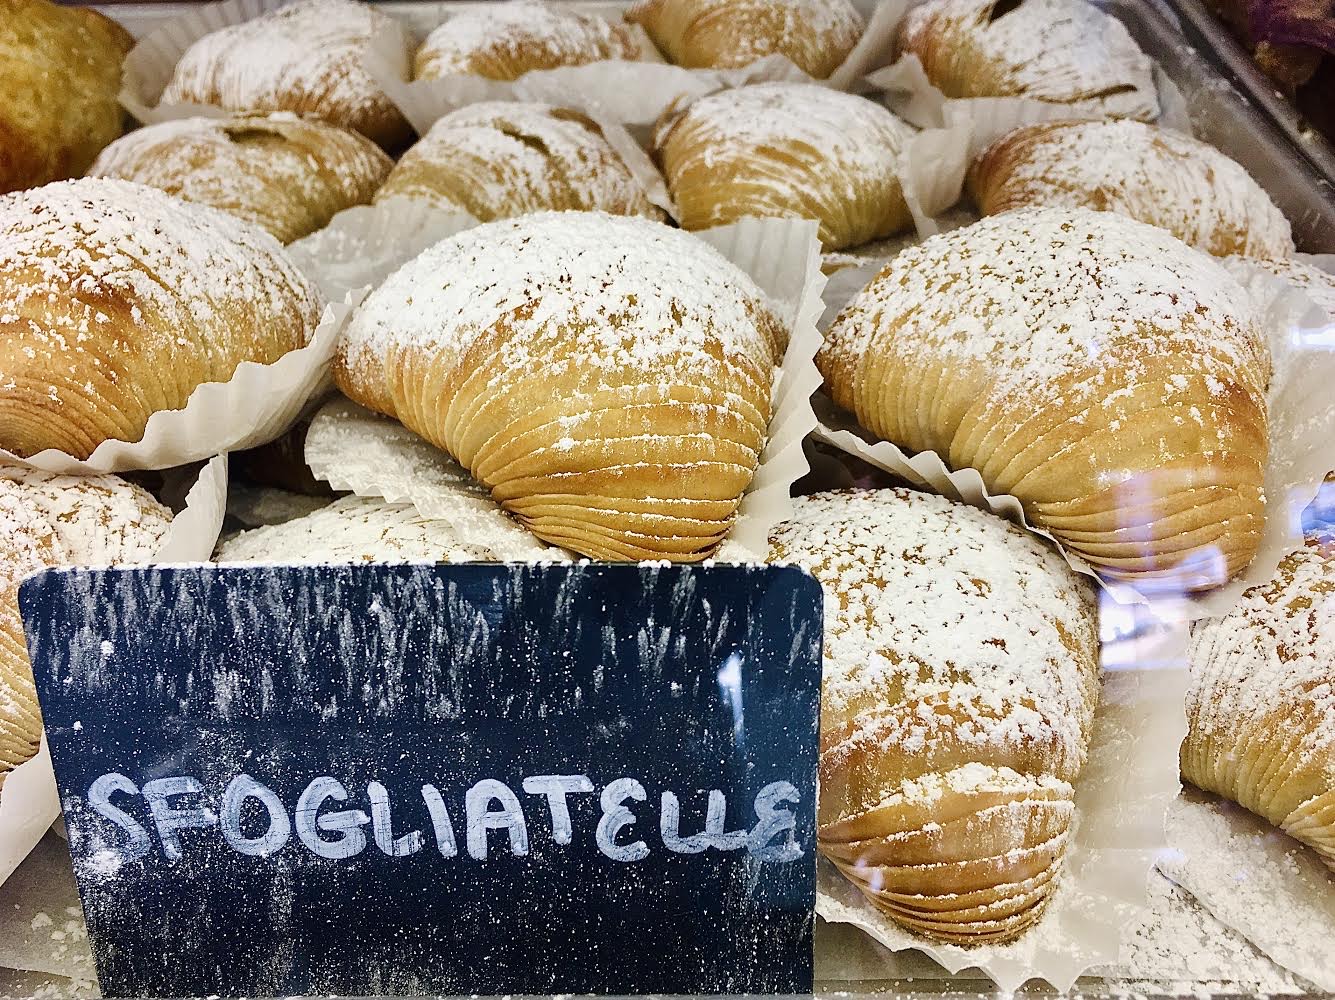 A tray of sfogliatelle, pastry that is shaped a bit like a lobster’s tail. Sfogliatella means “thin leaf” or “thin layer” in Italian.